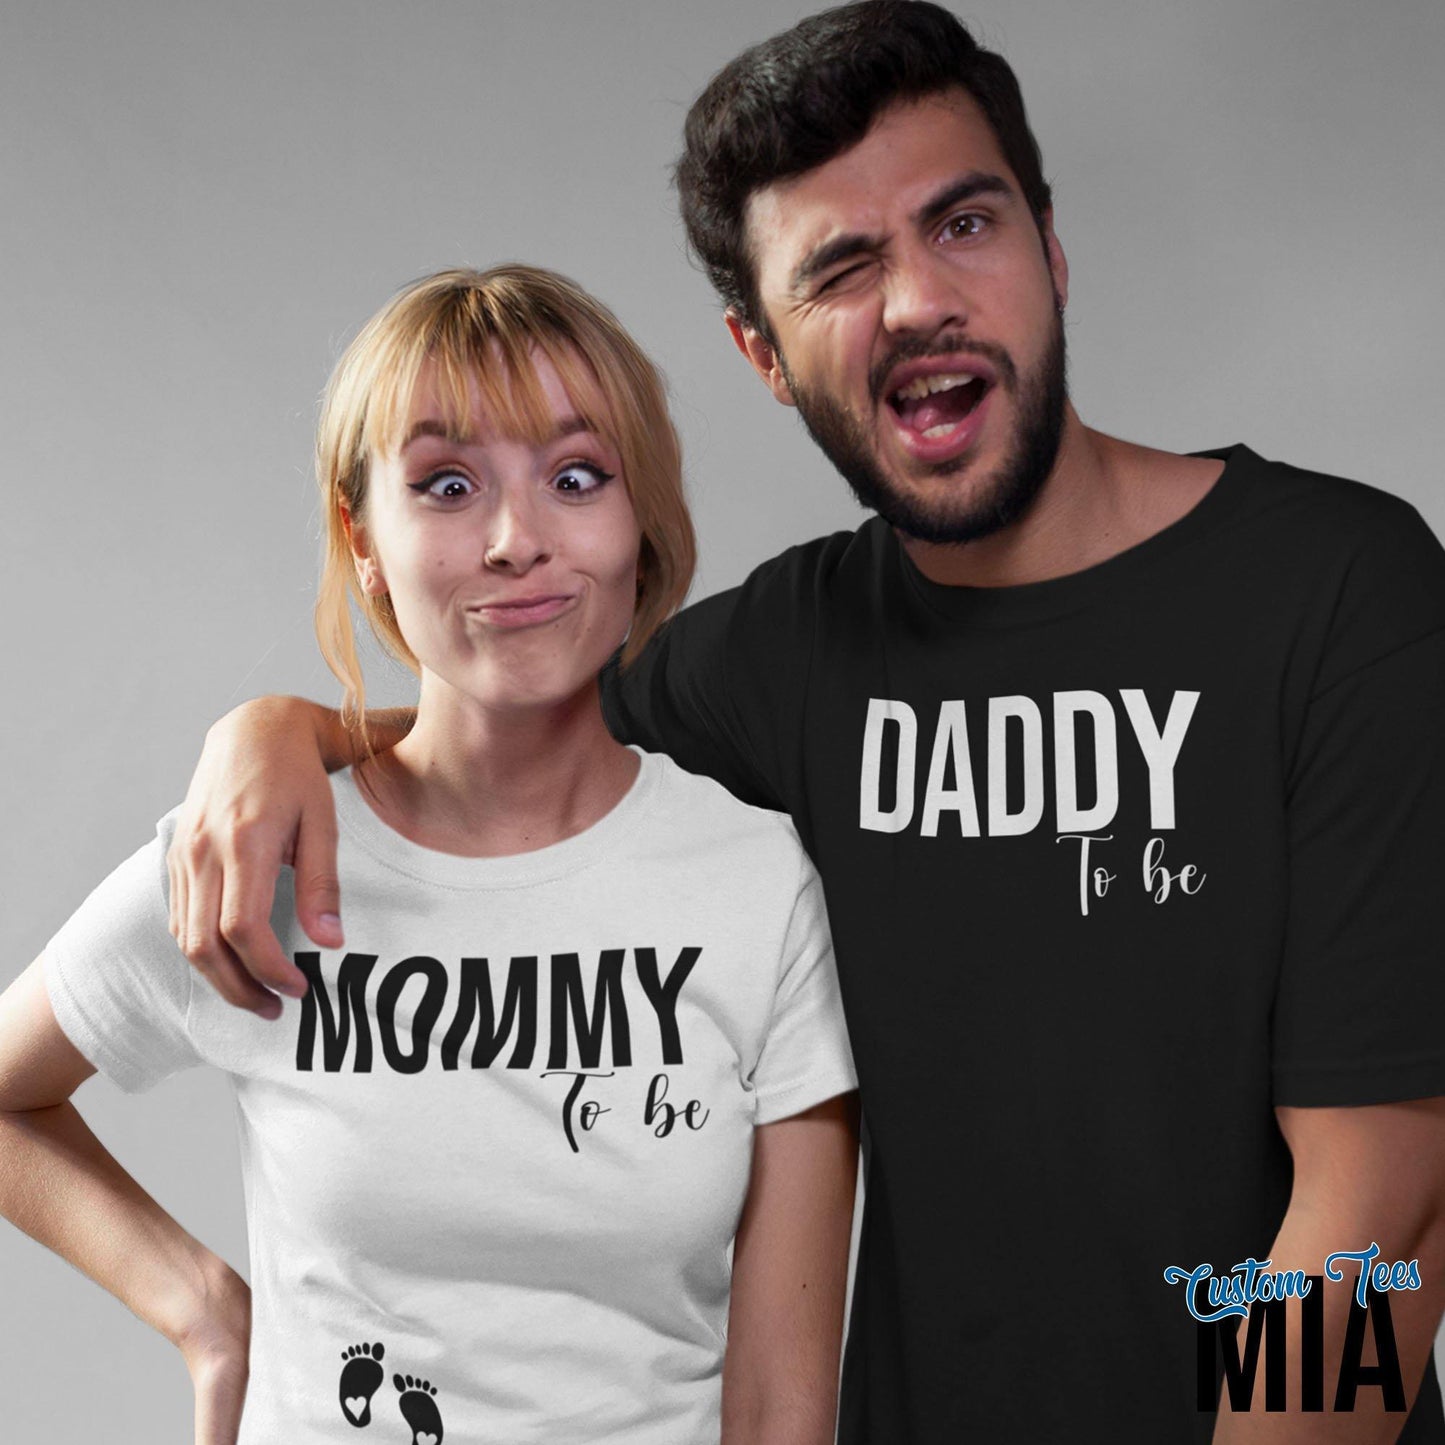 Mommy To Be & Daddy To Be Pregnancy Announcement Shirt - Custom Tees MIA